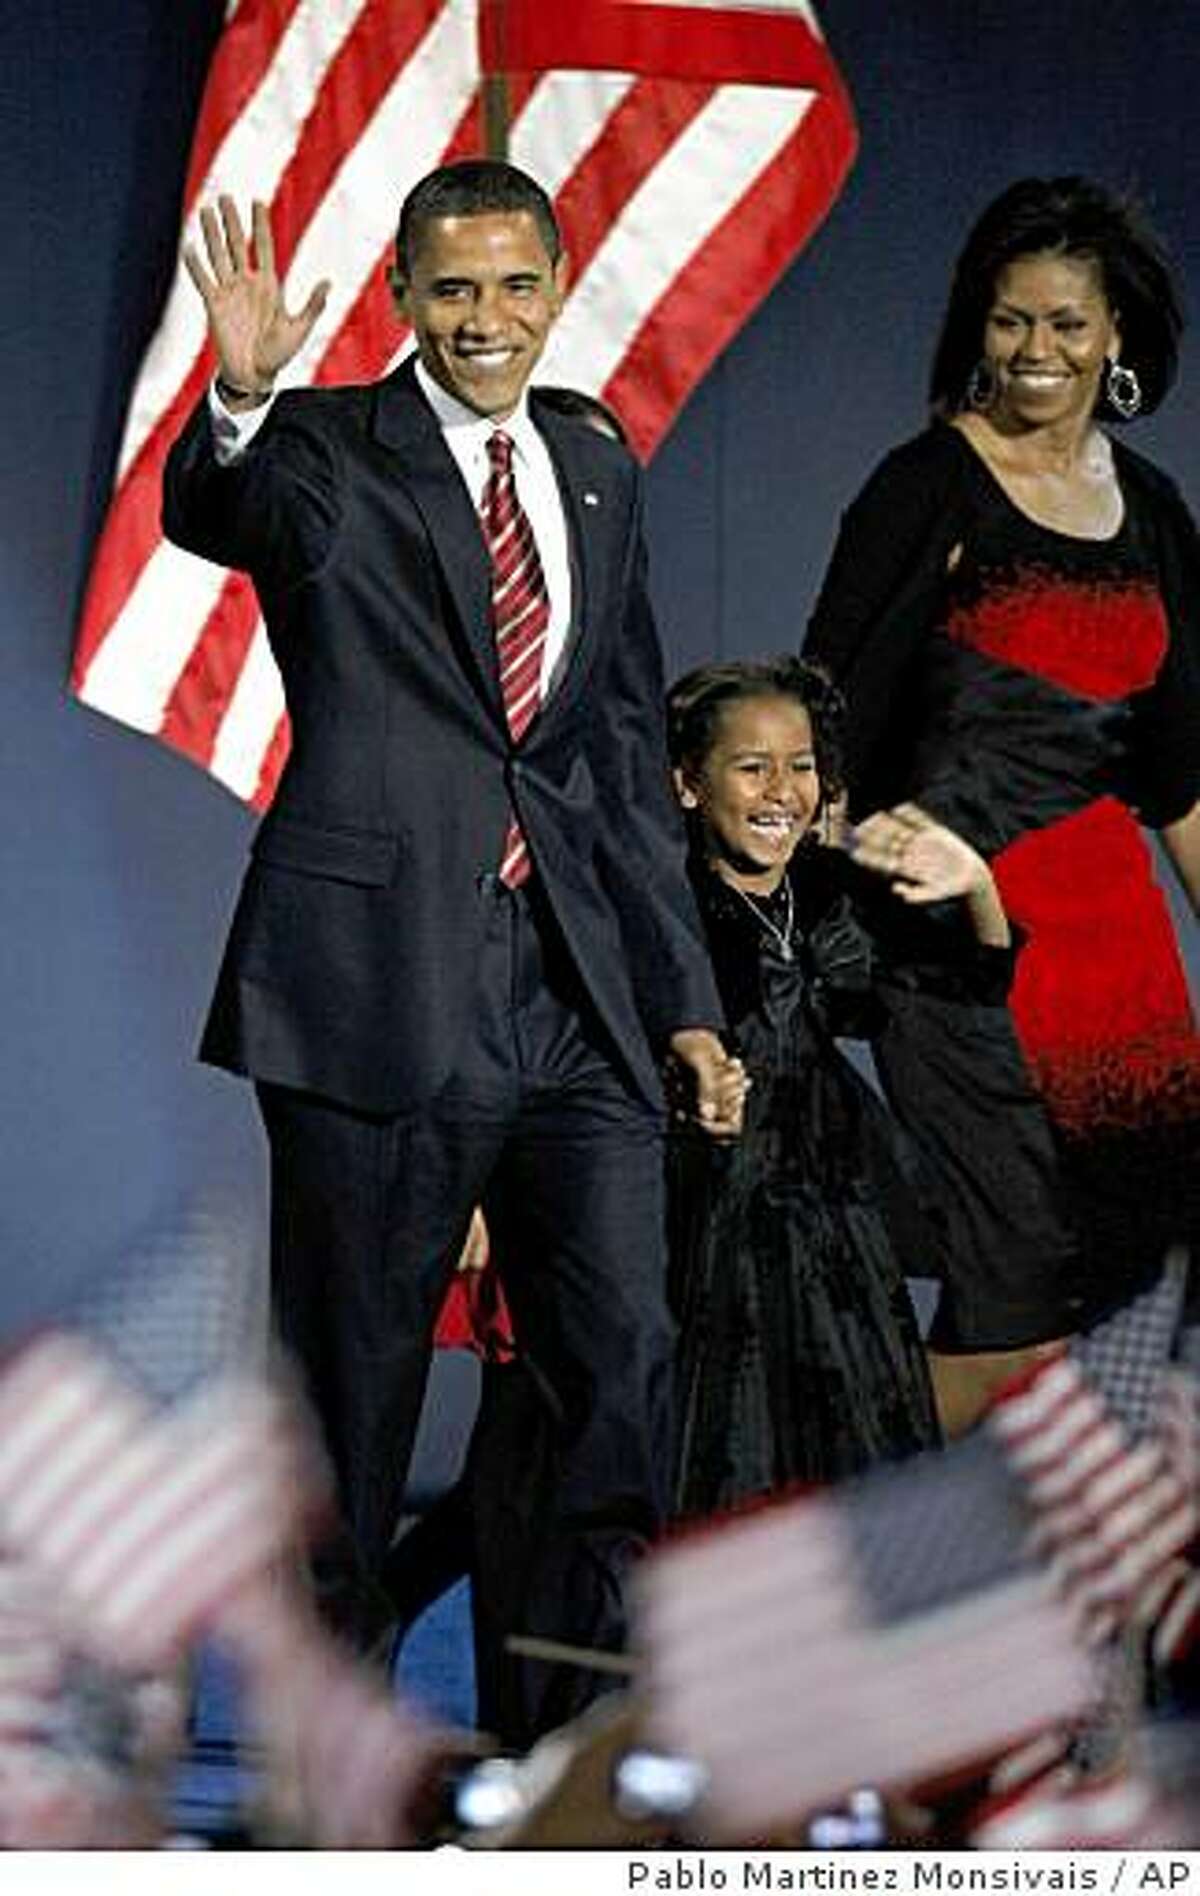 President-elect Barack Obama, his wife Michelle and daughter Sasha, 7, wave as they take the stage at his election night party at Grant Park in Chicago, Tuesday night, Nov. 4, 2008. (AP Photo/Pablo Martinez Monsivais)